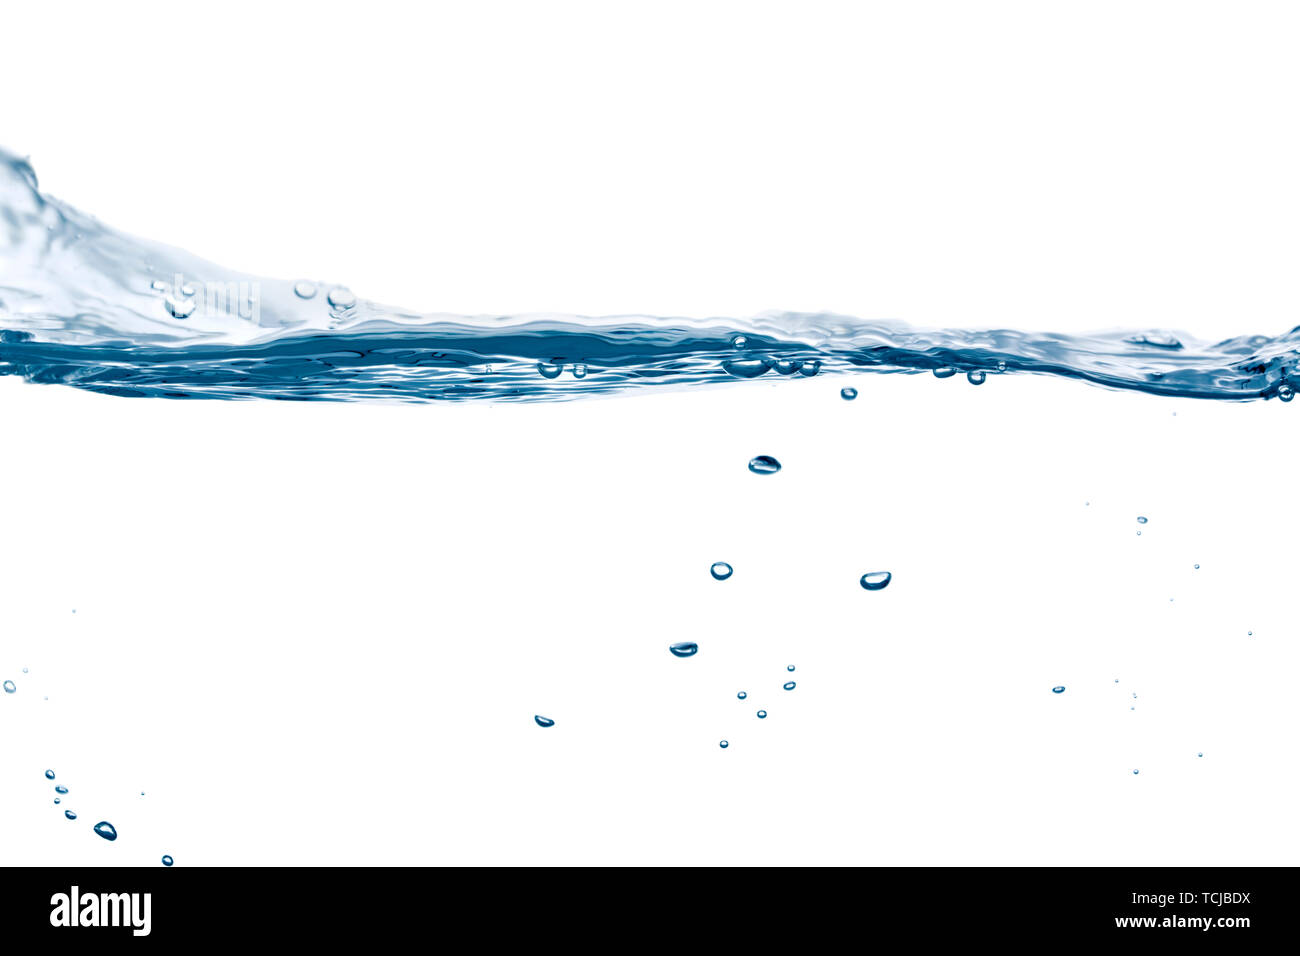 water flowing in gentle waves, some bubbles floating around, isolated on white background Stock Photo